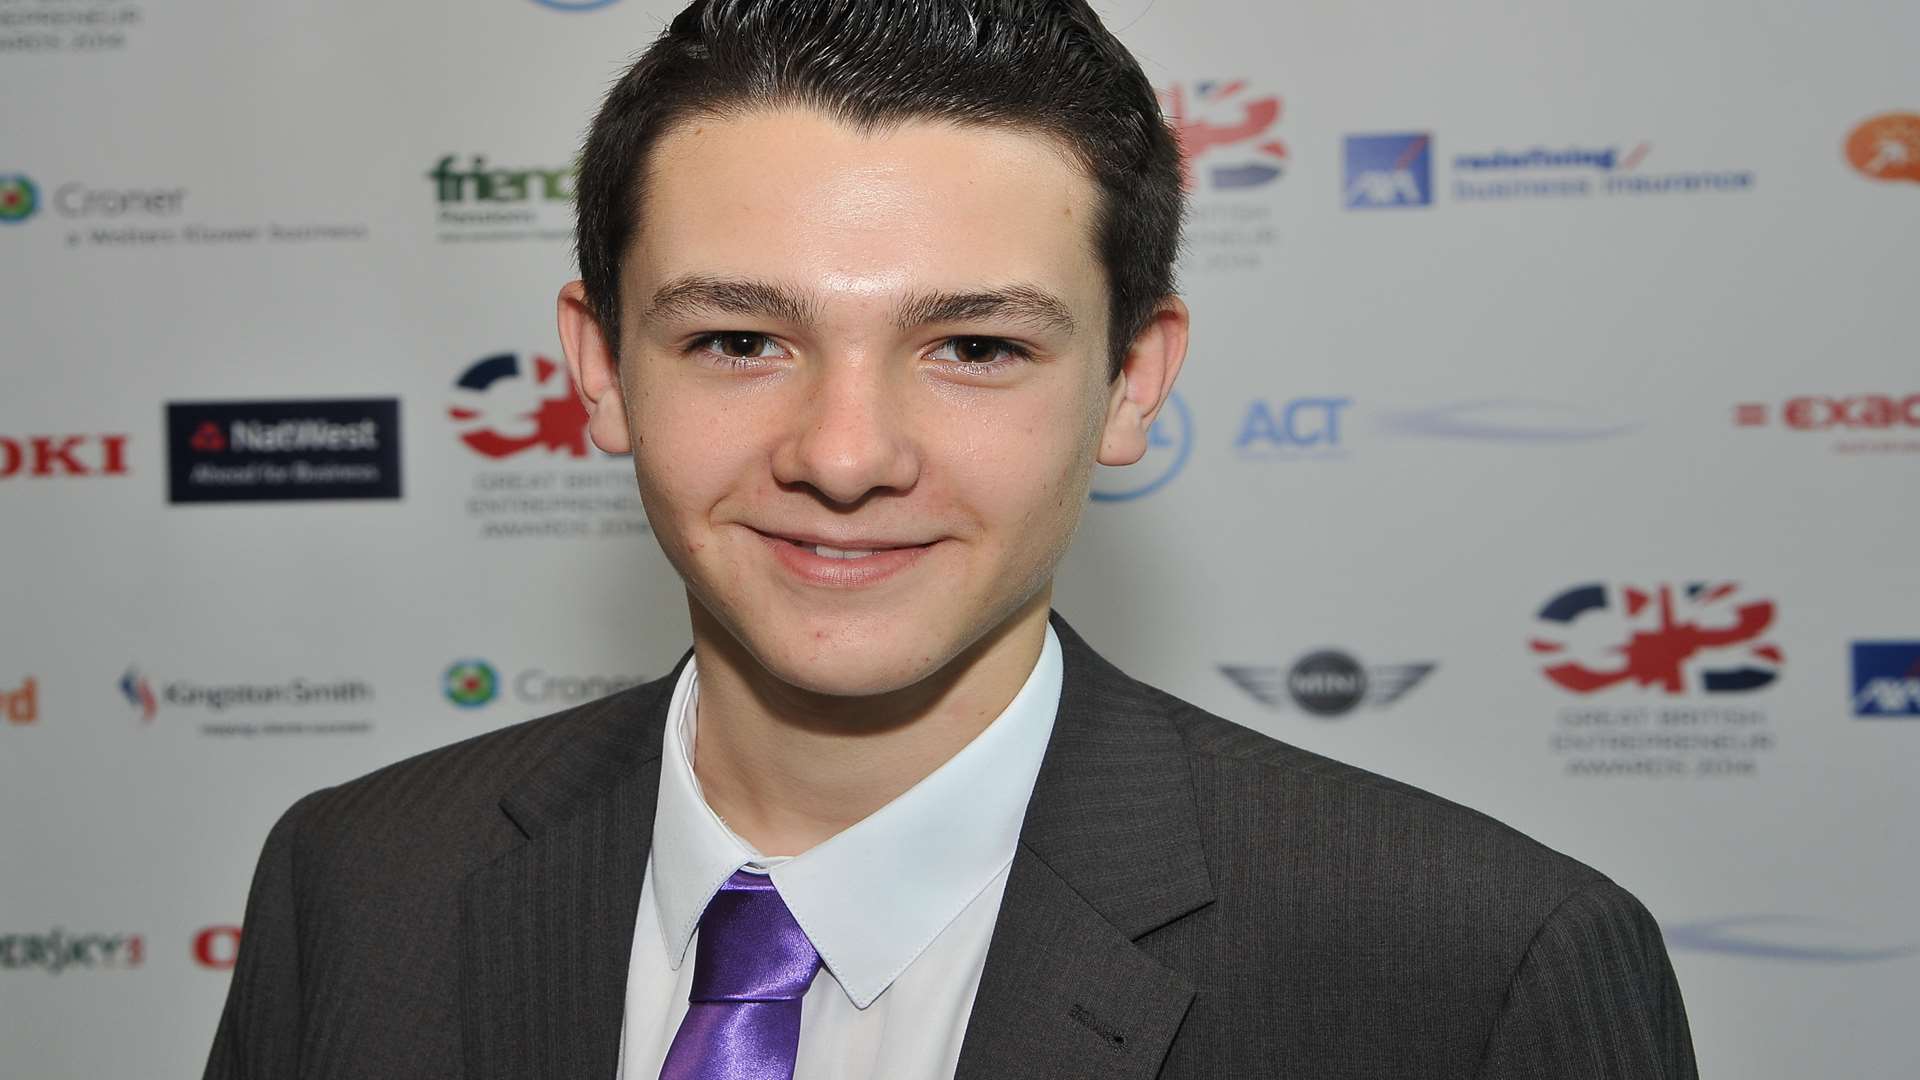 Ben Towers, 17, has been ranked alongside Richard Branson and Lord Sugar in a list of the UK's top entrepreneurs